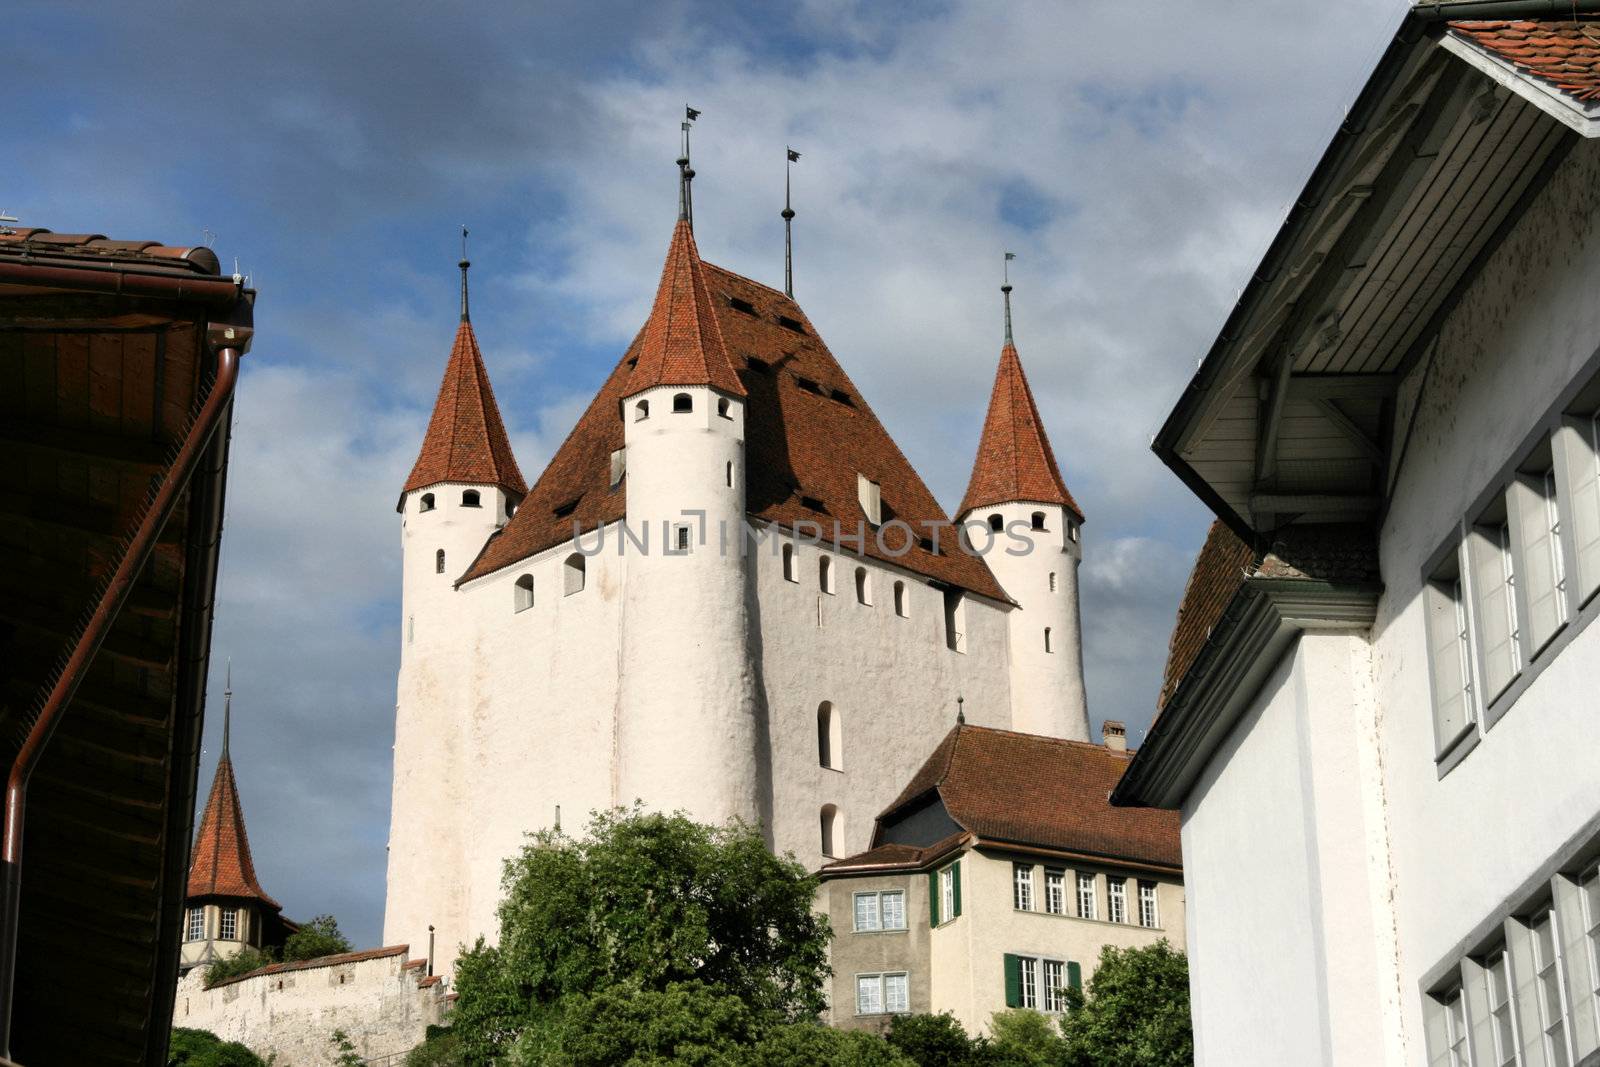 Old castle in Thun, next to Aare river. Switzerland town.